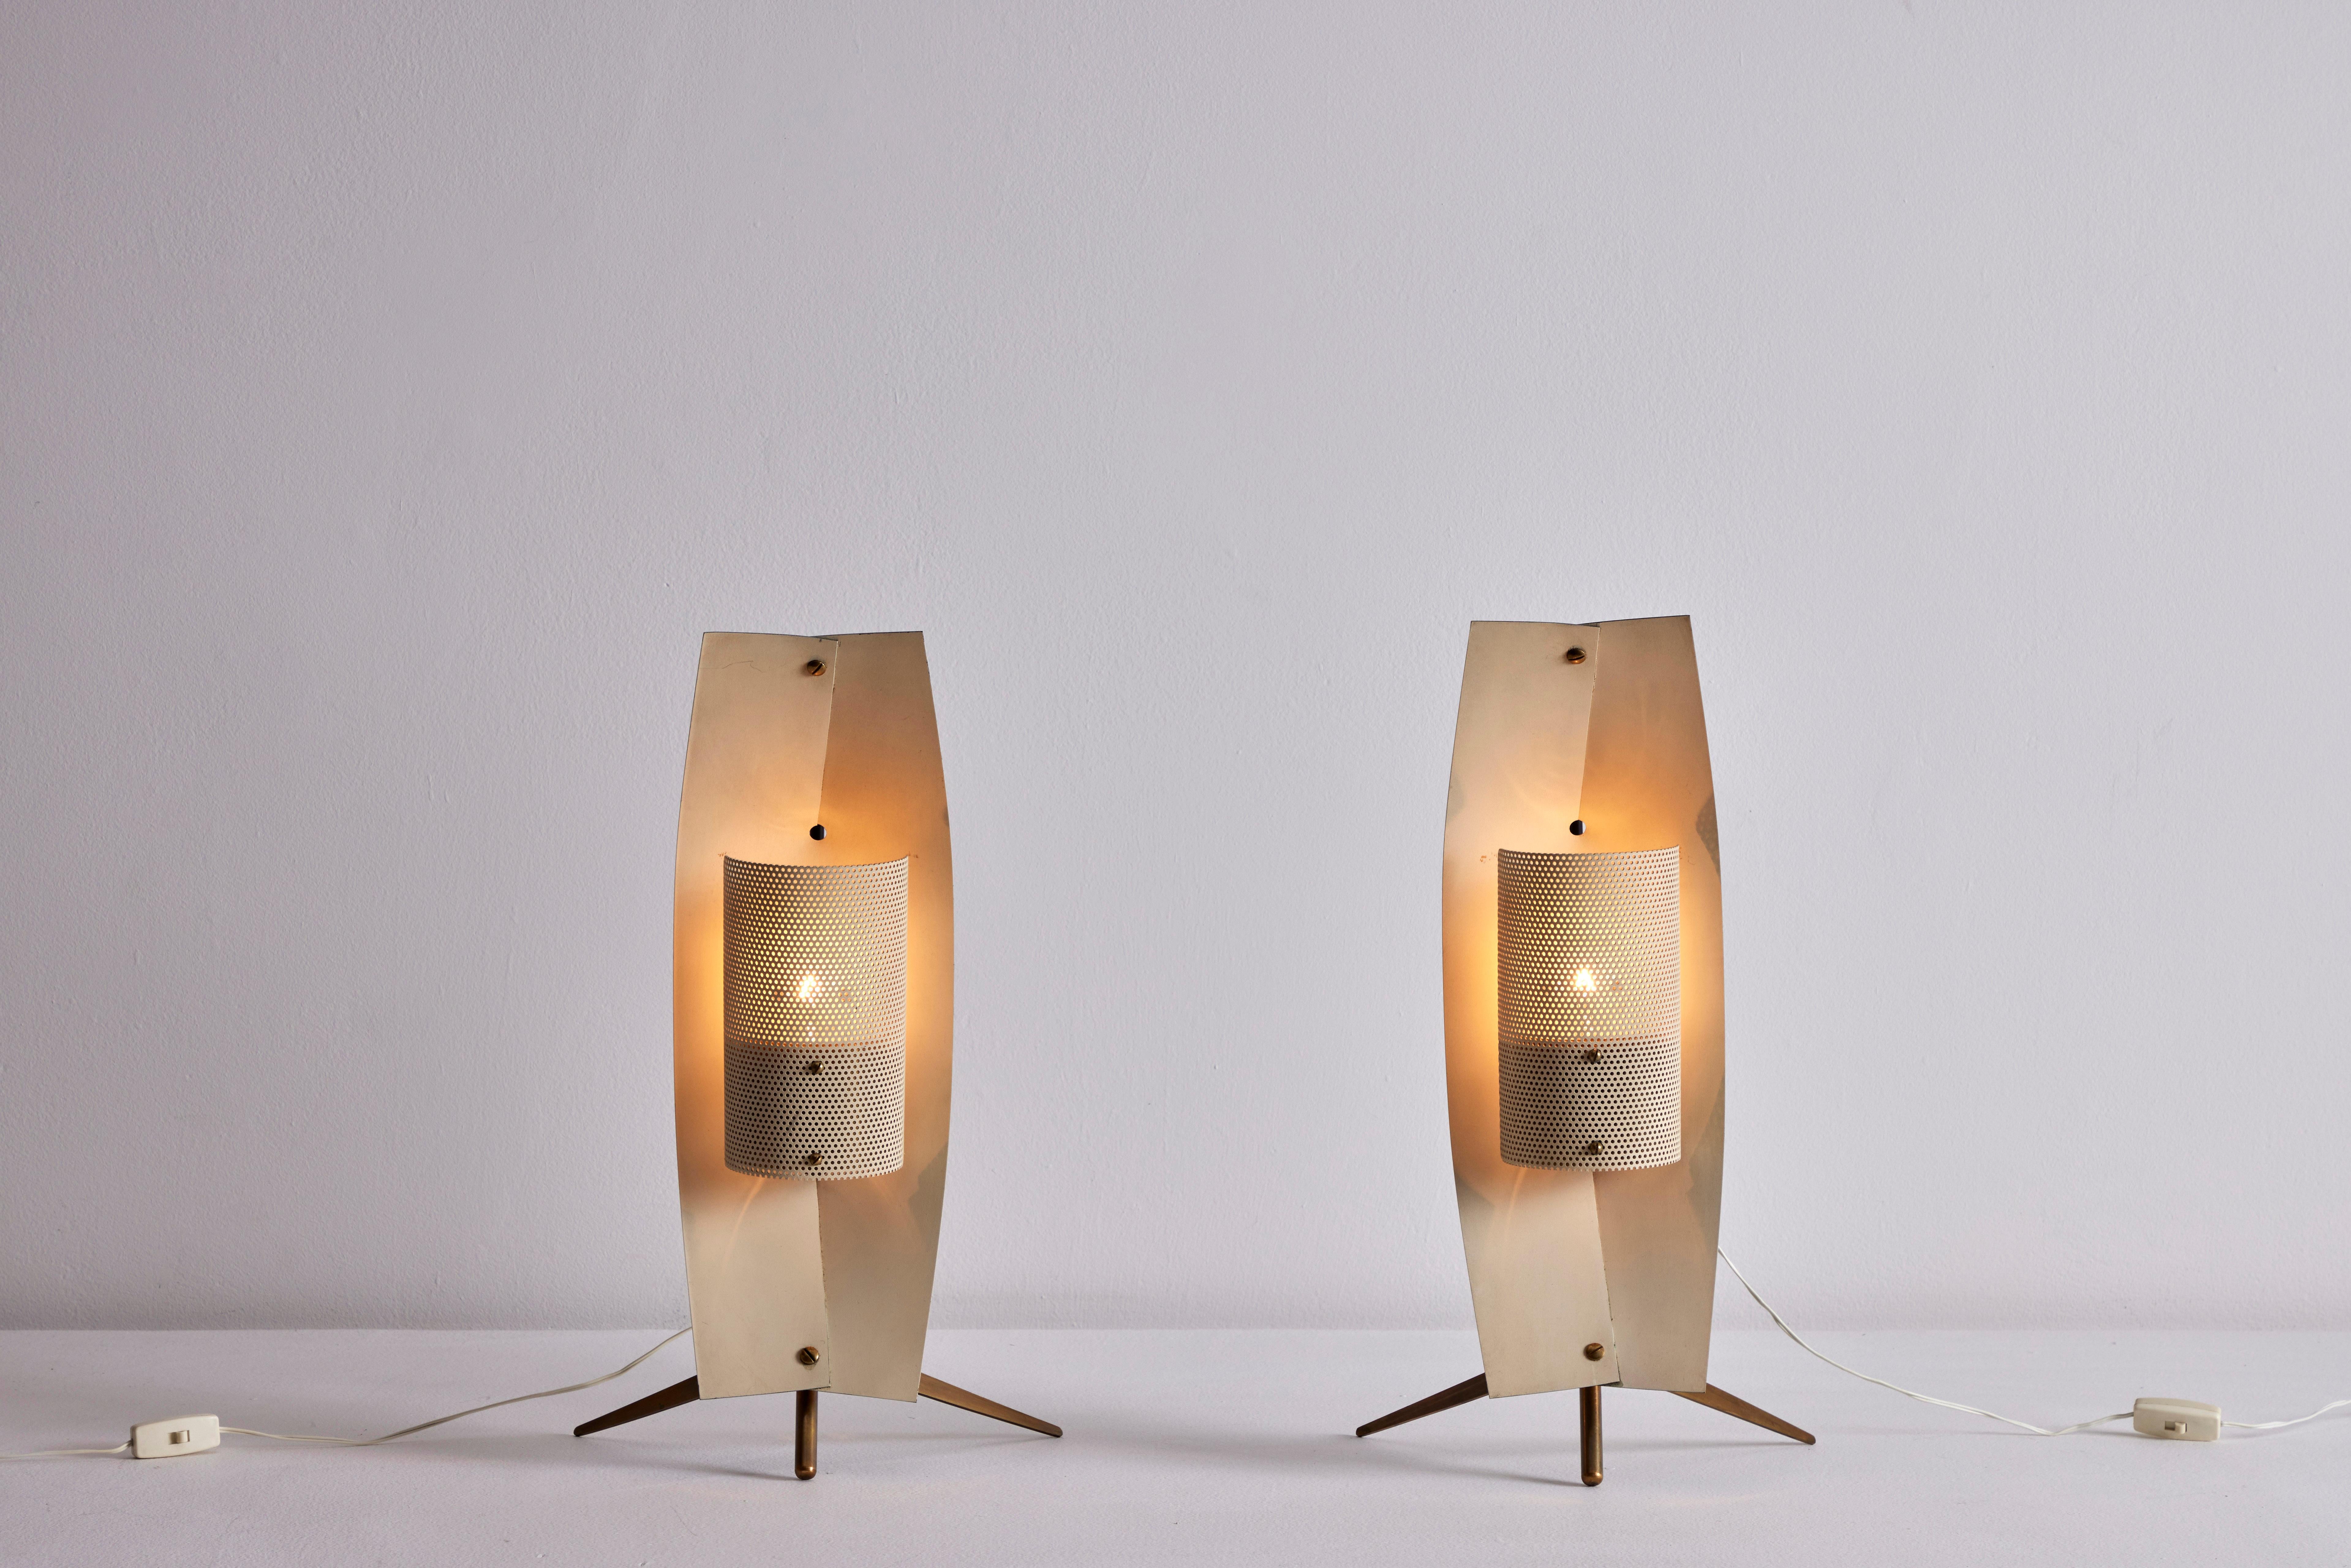 Two table wall/table lamps by Gastone Colliva. Manufactured in Italy, circa 1960's. Painted metal, brass, original European cord. Can be used as table or wall lamps. We recommend one E14 40W maximum bulb per light. Bulbs not included. Priced and